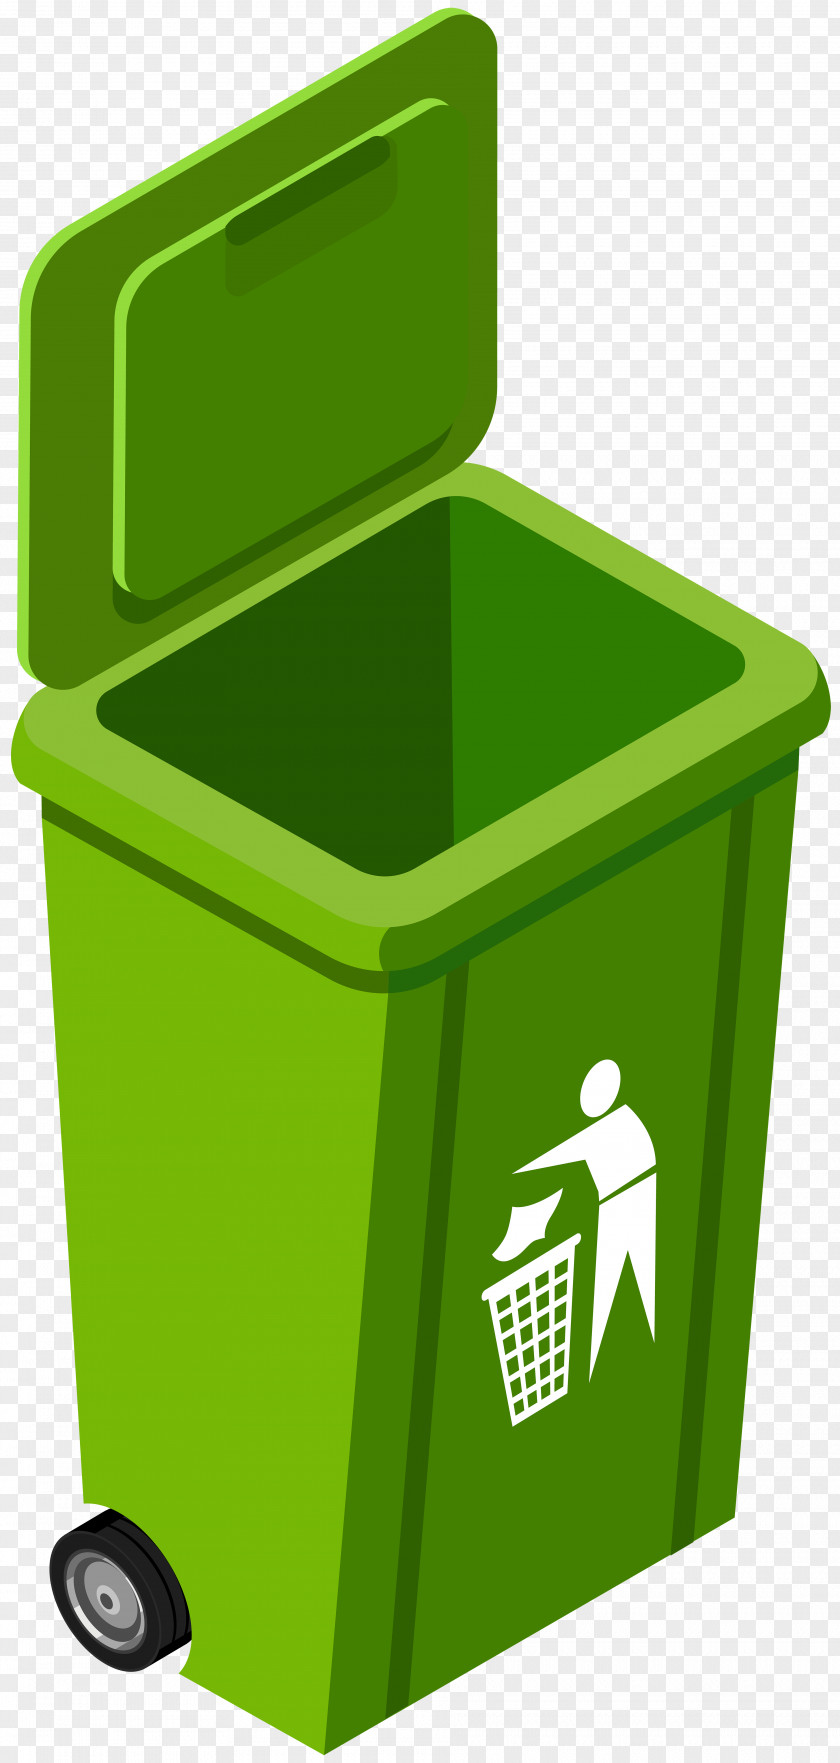 Cans Rubbish Bins & Waste Paper Baskets Recycling Bin Clip Art PNG